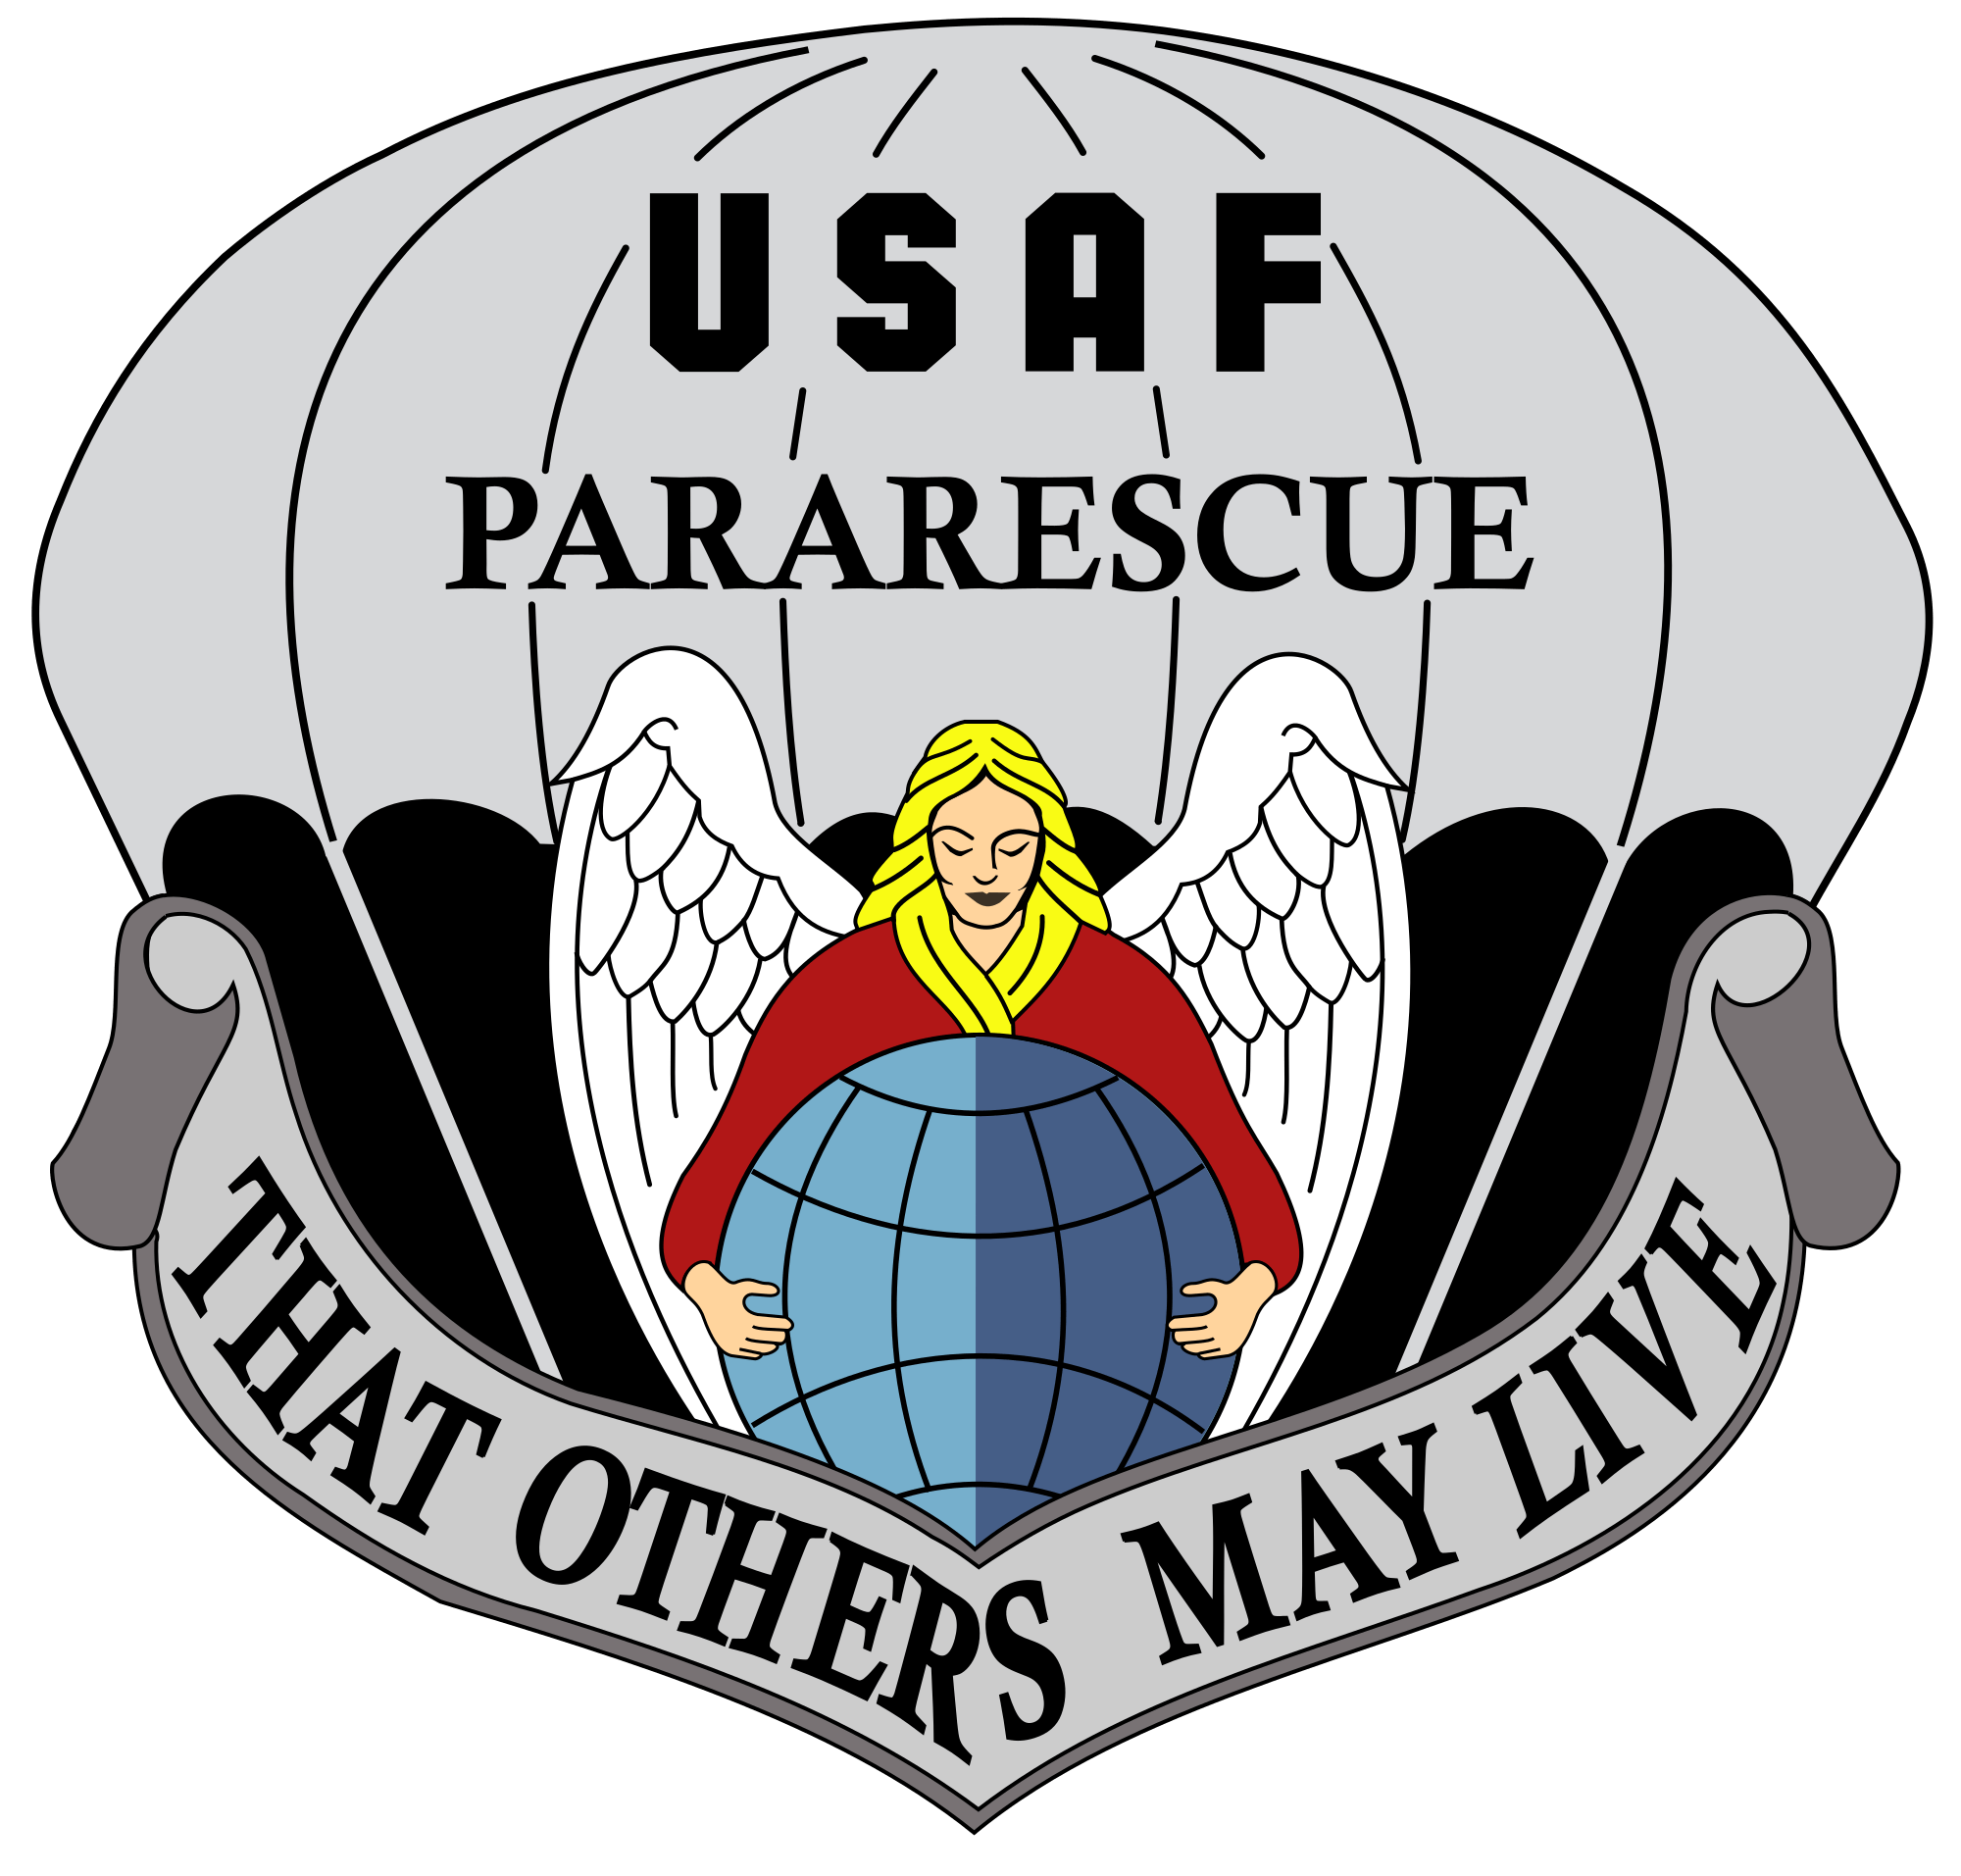 AFSOC Logo - United States Air Force Pararescue